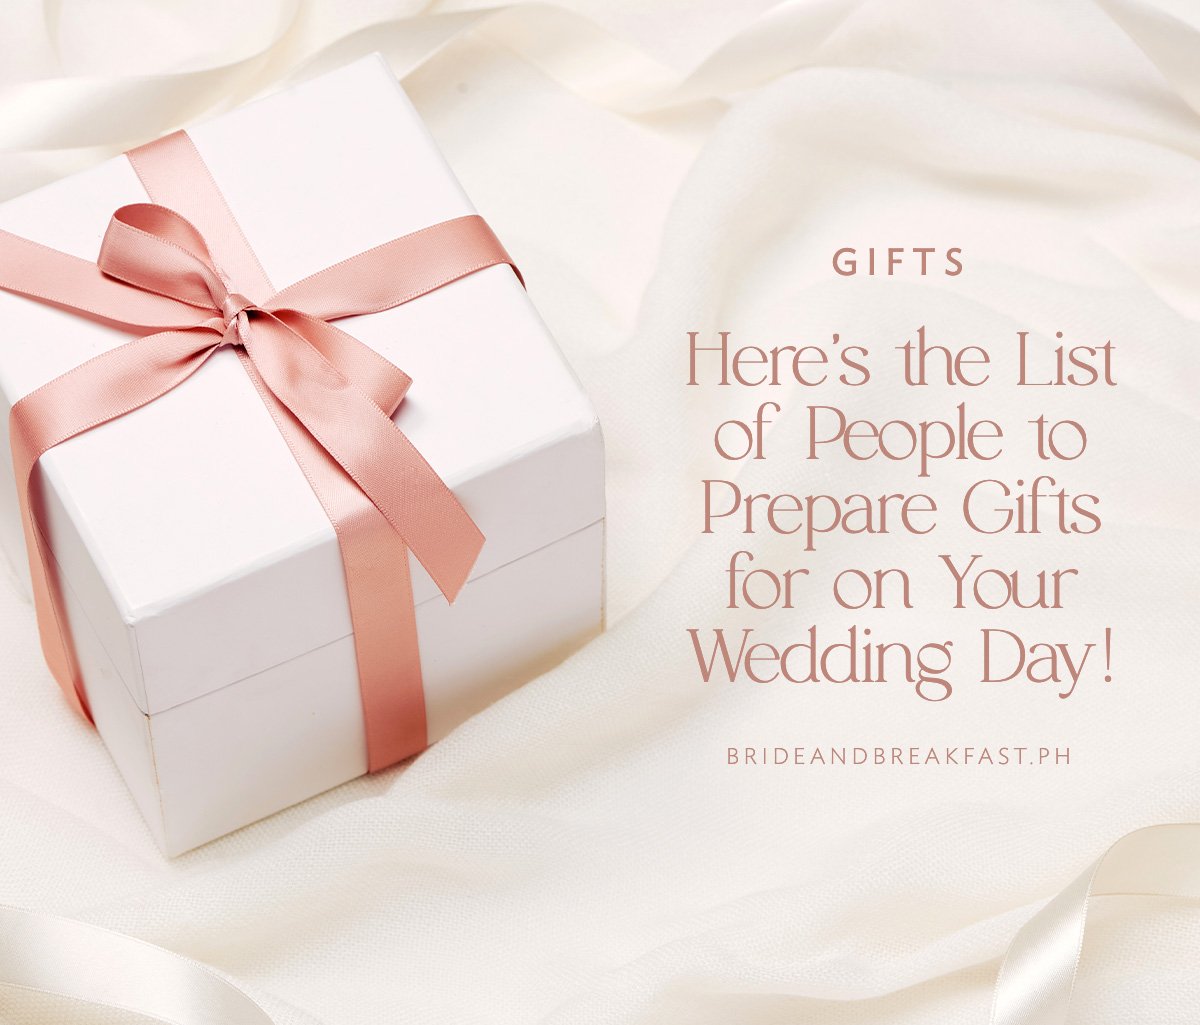 Gift List Guide: Here’s the List of People to Prepare Gifts for on Your Wedding Day!